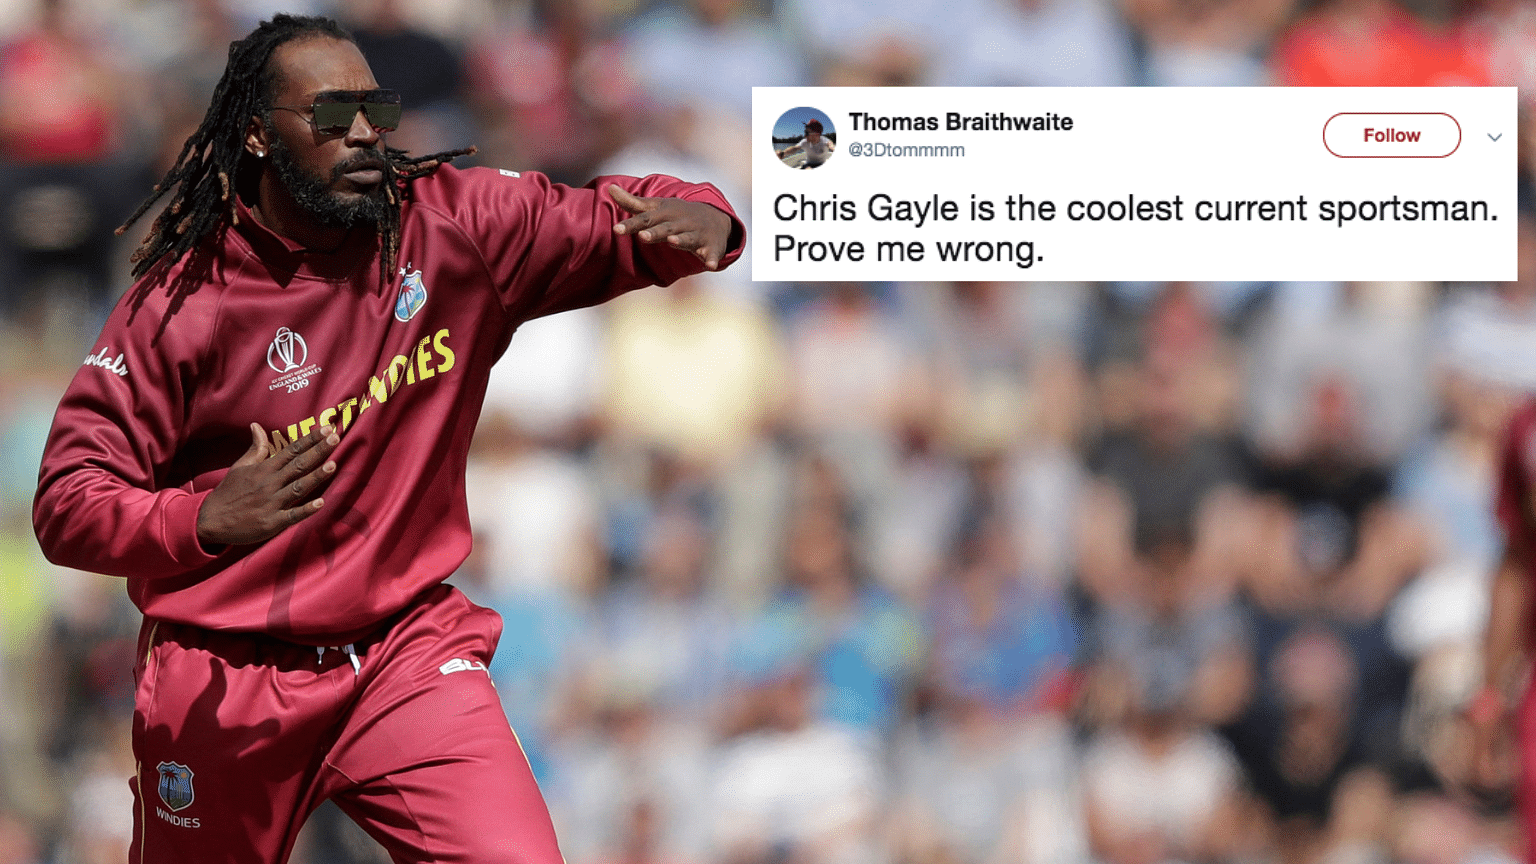 Chris Gayle was introduced into the bowling attack in the 21st over, and gave away just 1 run!